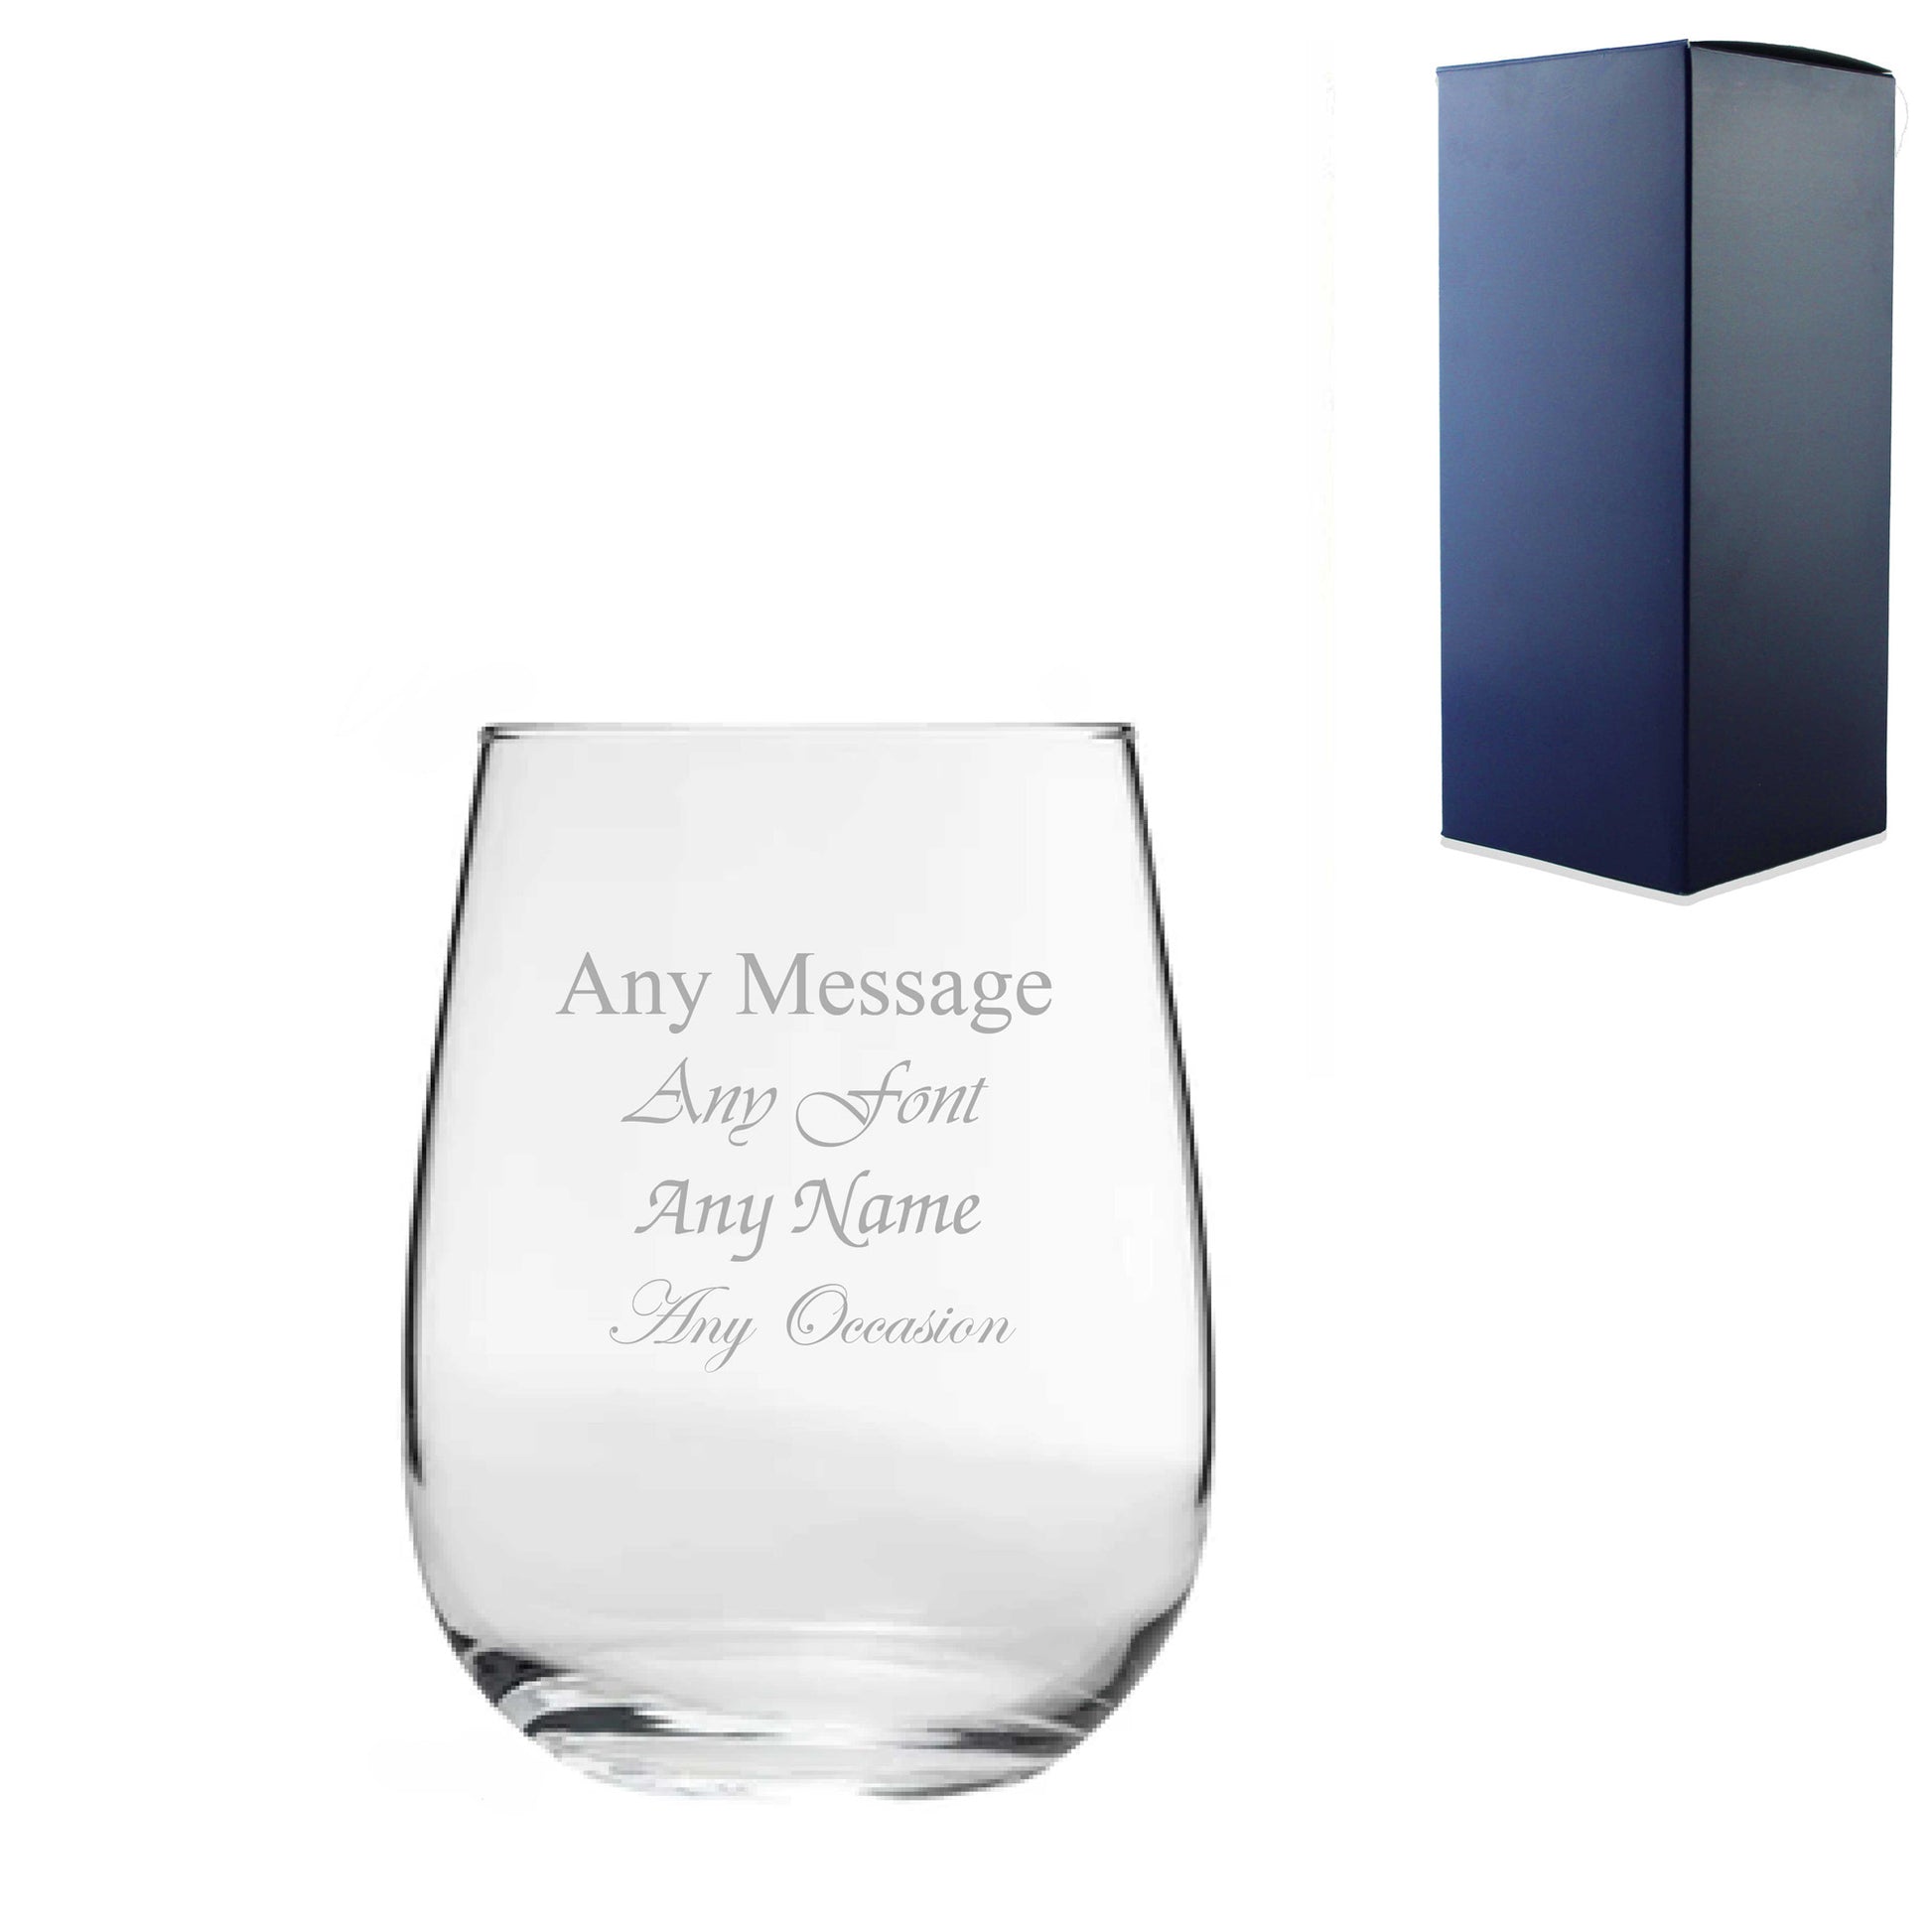 Engraved 475ml Corto Stemless Wine Glass with Gift Box Image 2